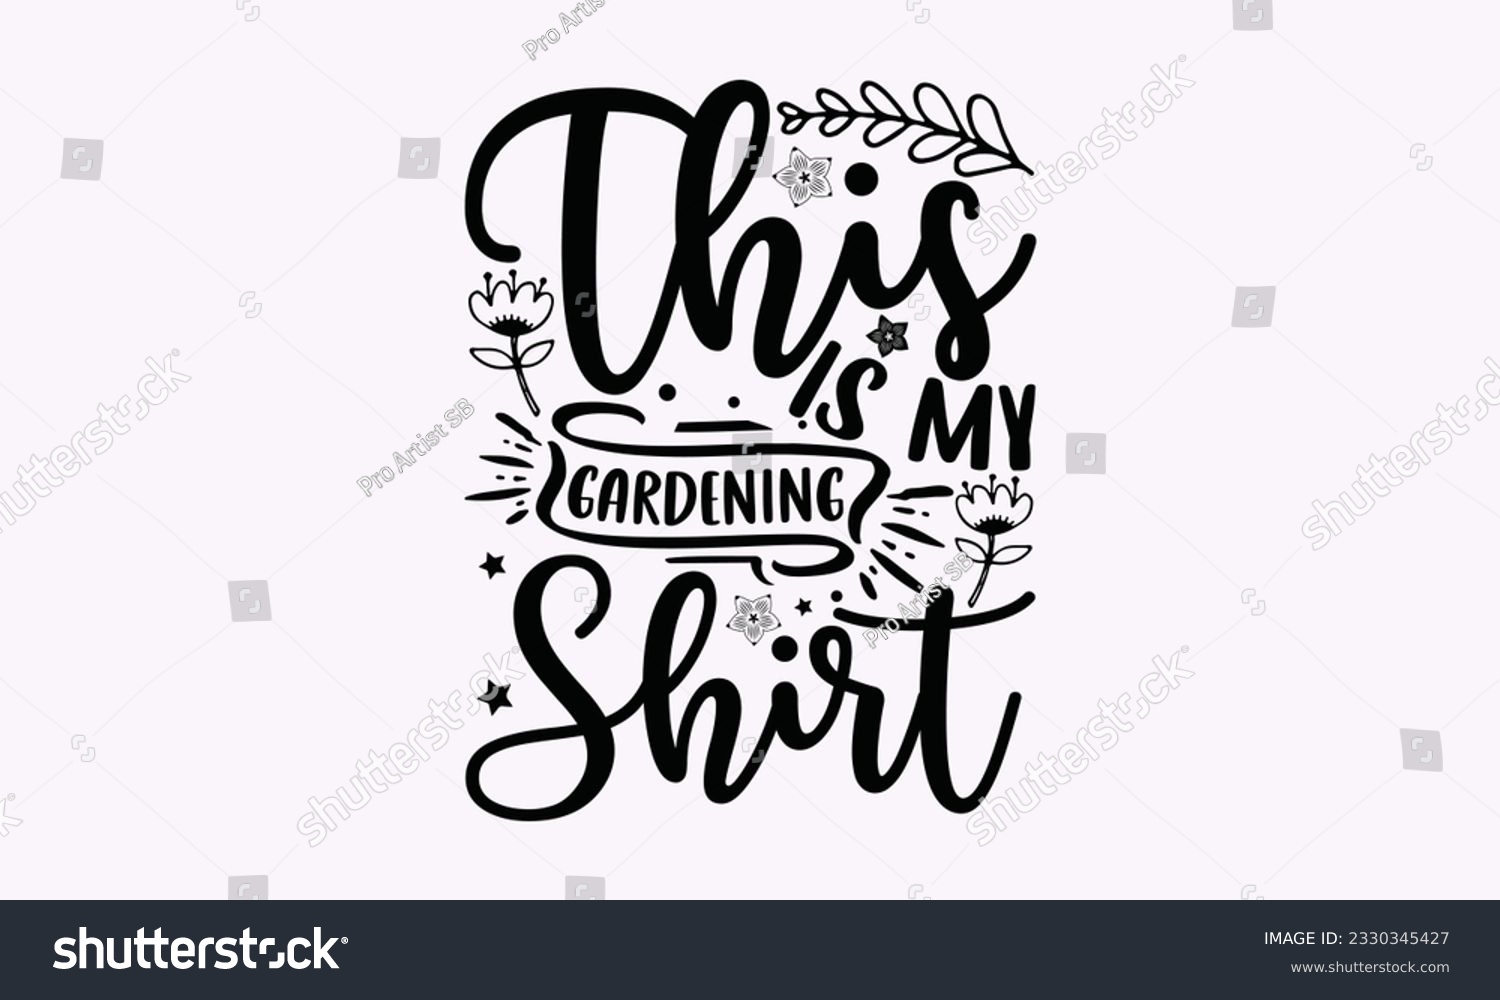 SVG of This is my gardening shirt - Gardening SVG Design, Flower Quotes, Calligraphy graphic design, Typography poster with old style camera and quote. svg